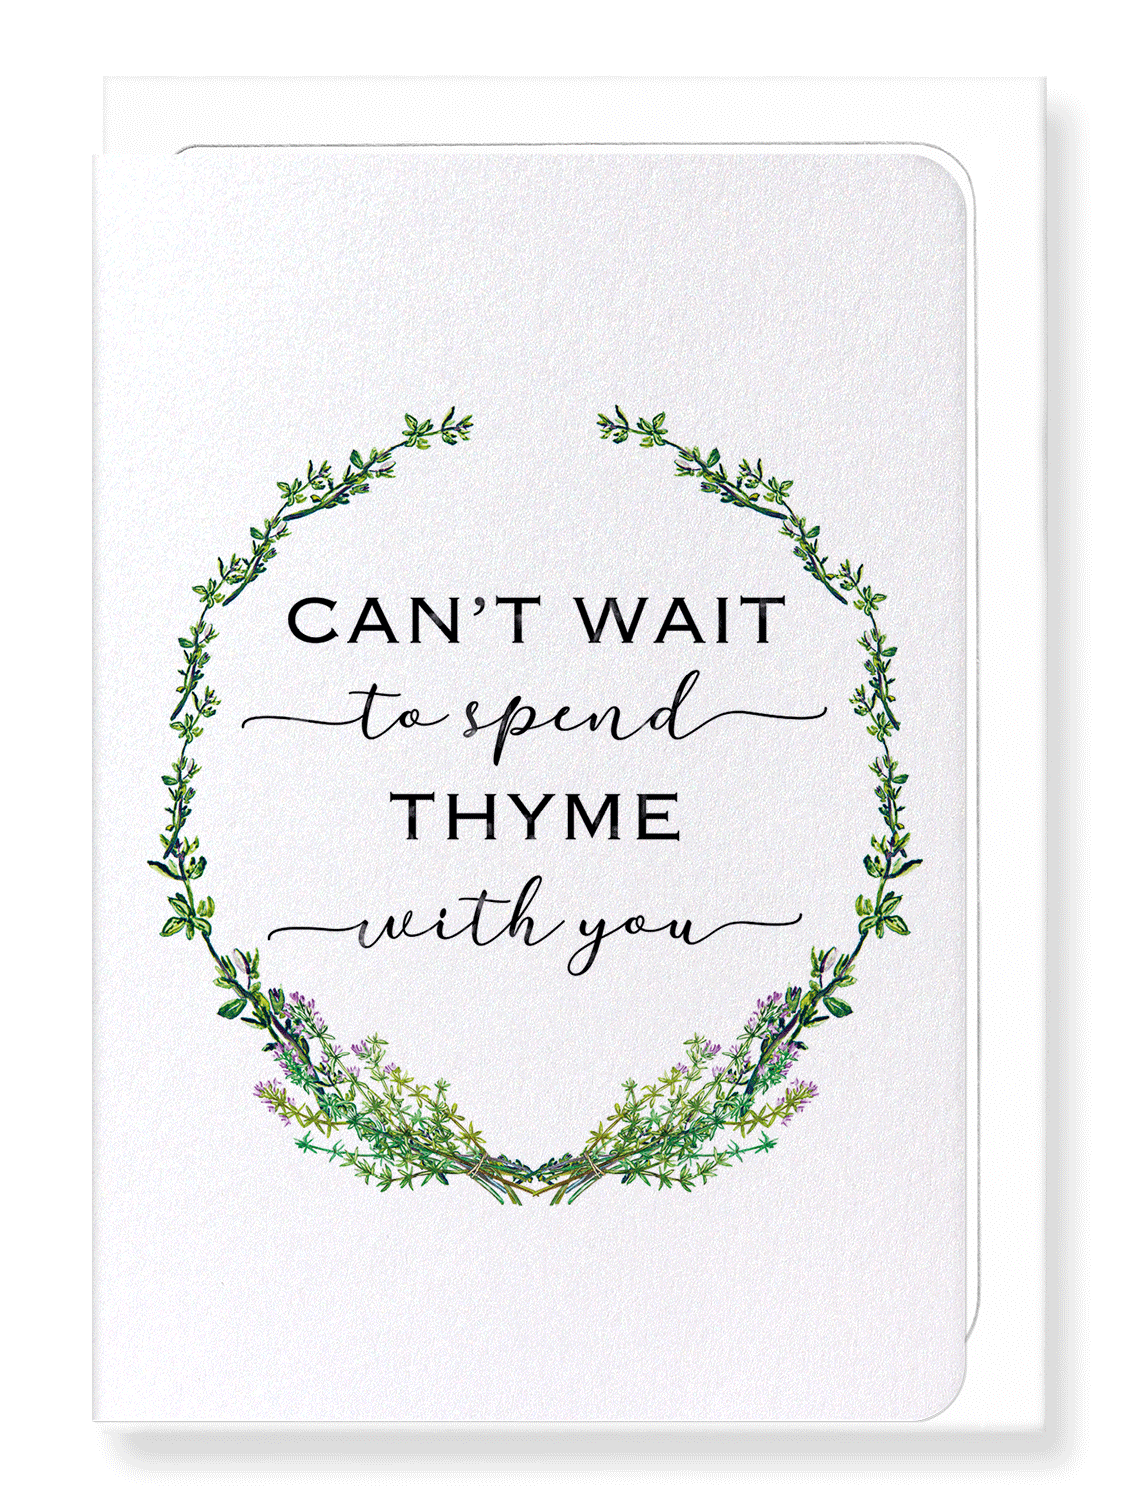 Ezen Designs - Spend thyme with you - Greeting Card - Front